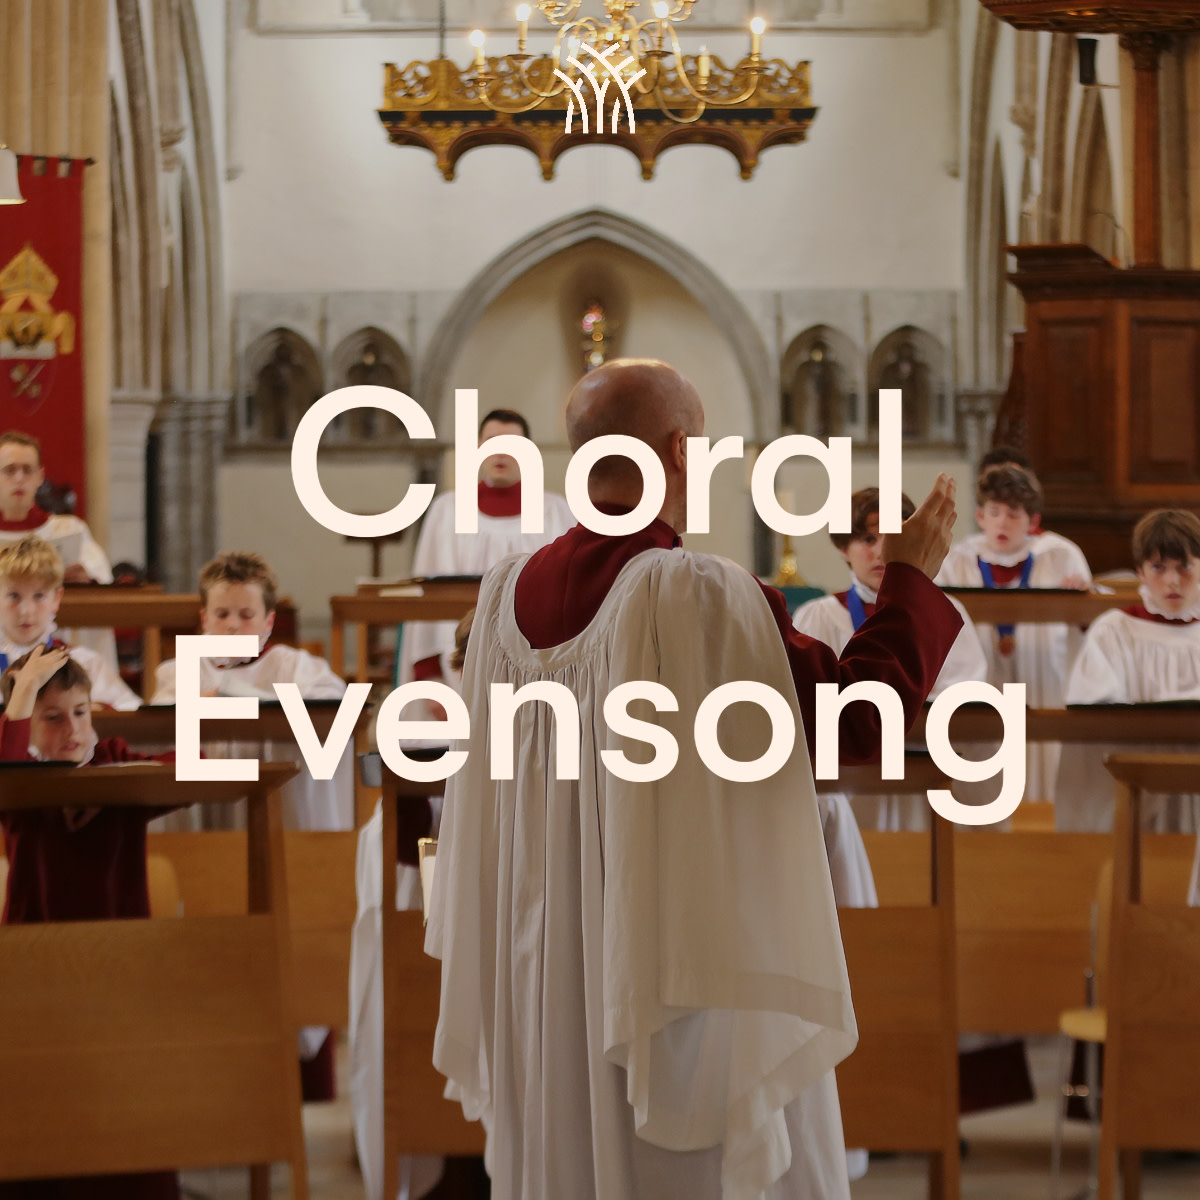 Discover the beauty of Choral Evensong at Portsmouth Cathedral, join us for an peaceful service with music, prayer, and spiritual reflection. See dates at portcath.link/evensong?utm_c… #Evensong #PortsmouthCathedral